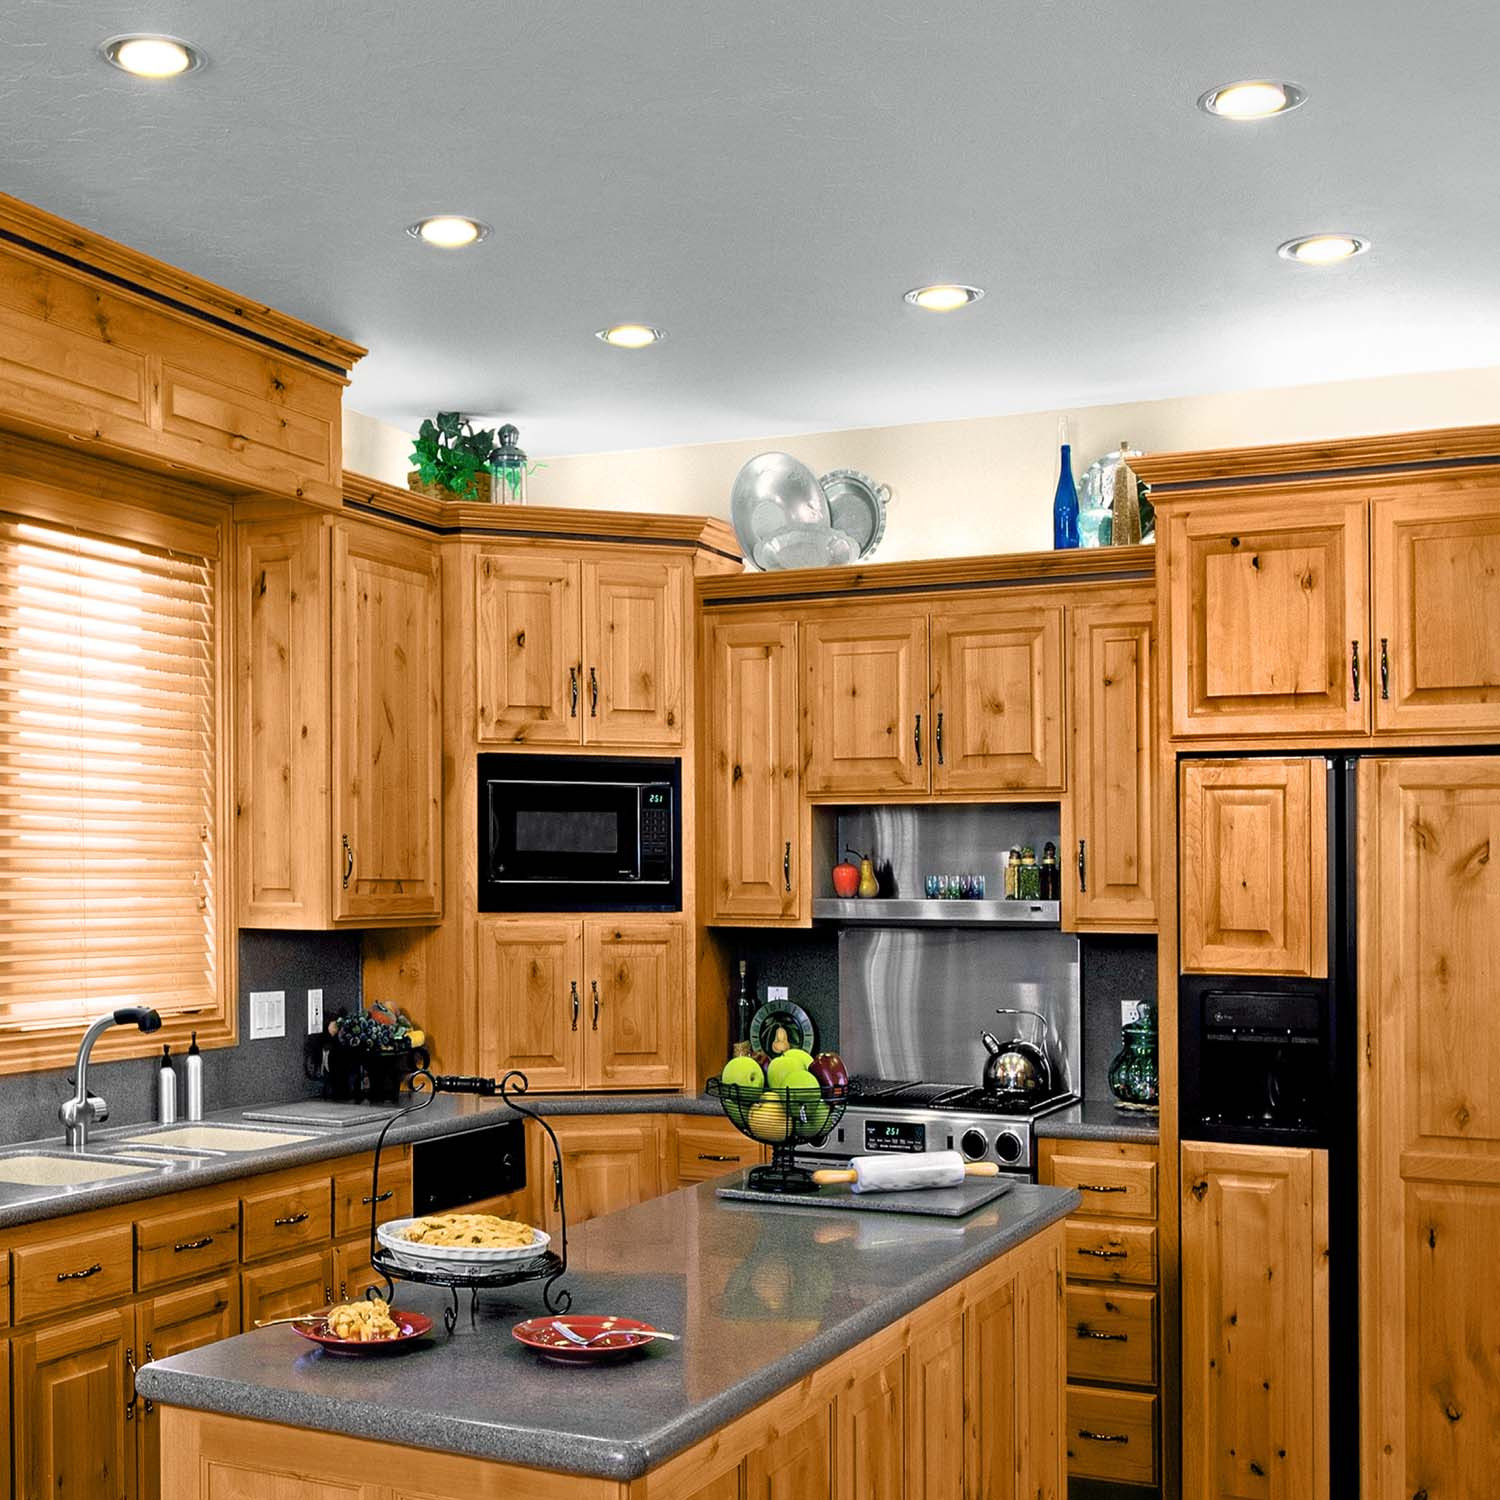 Recessed Lighting Kitchens
 10 benefits of Led ceiling recessed lights